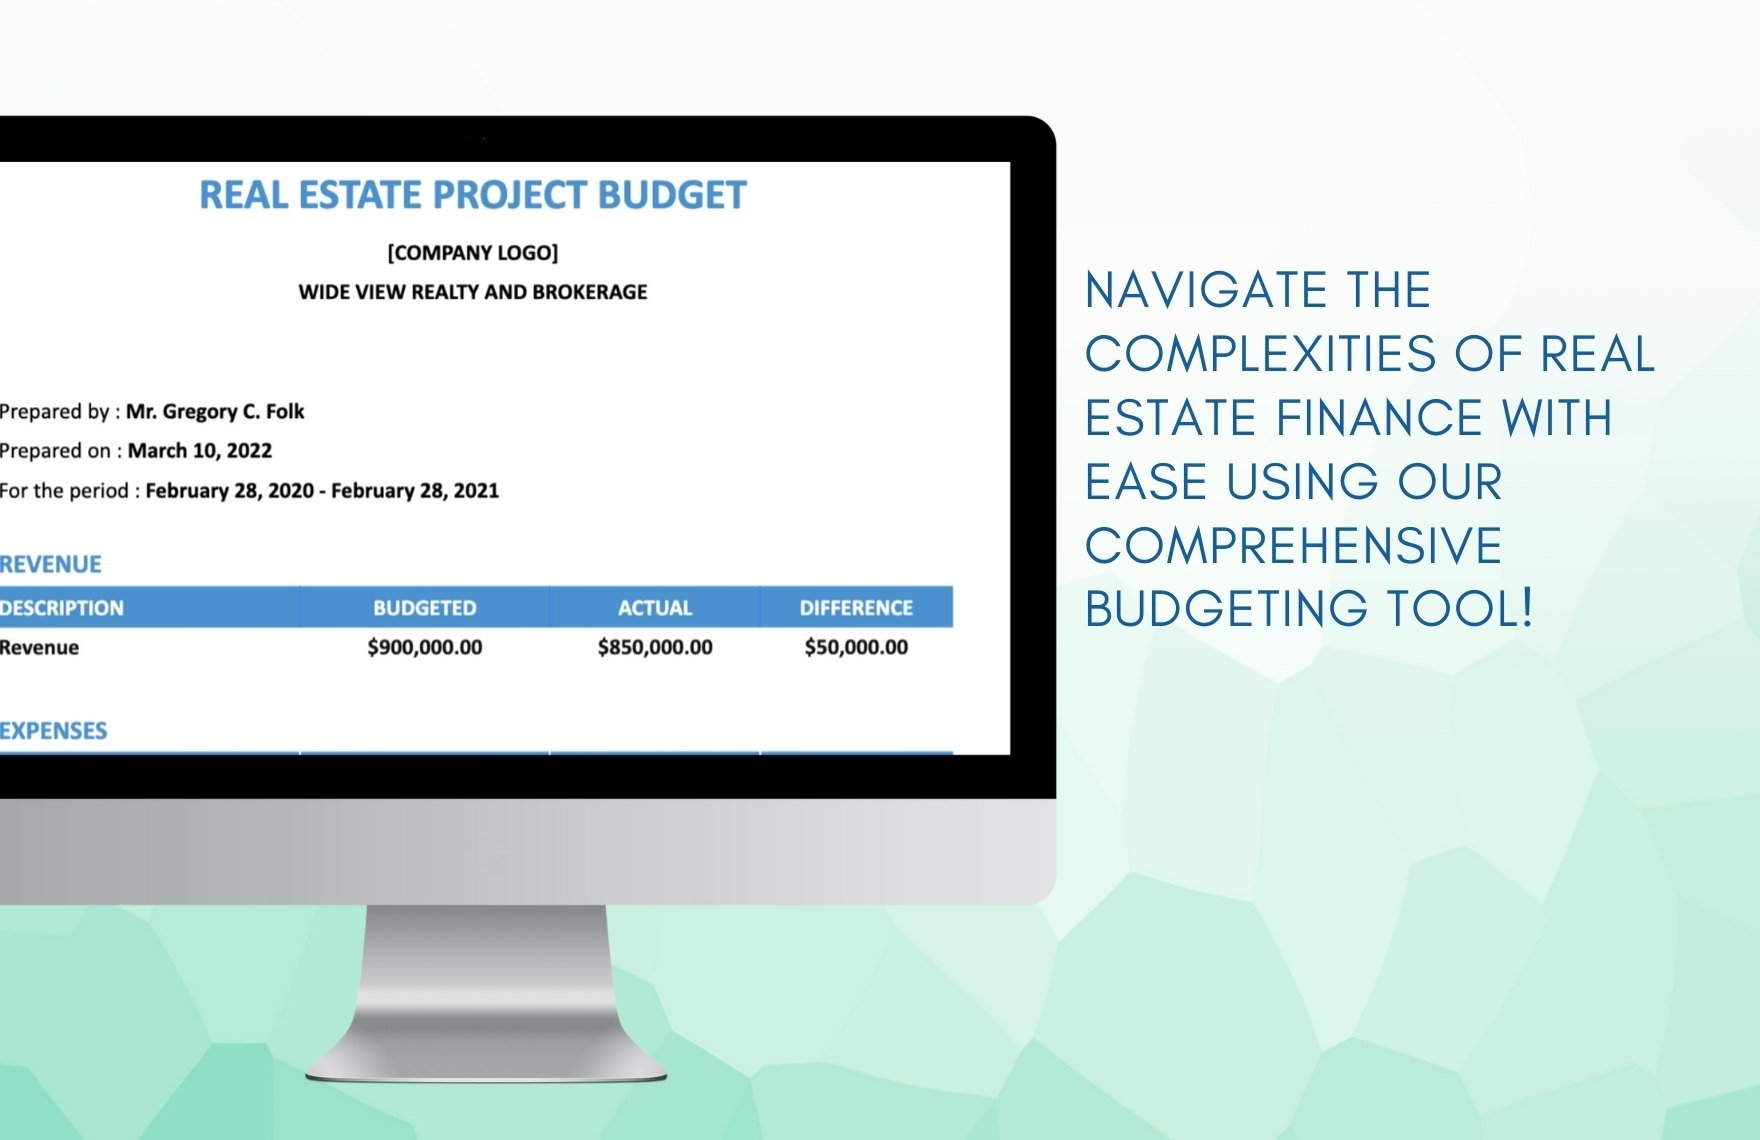 Real Estate Project Budget Template